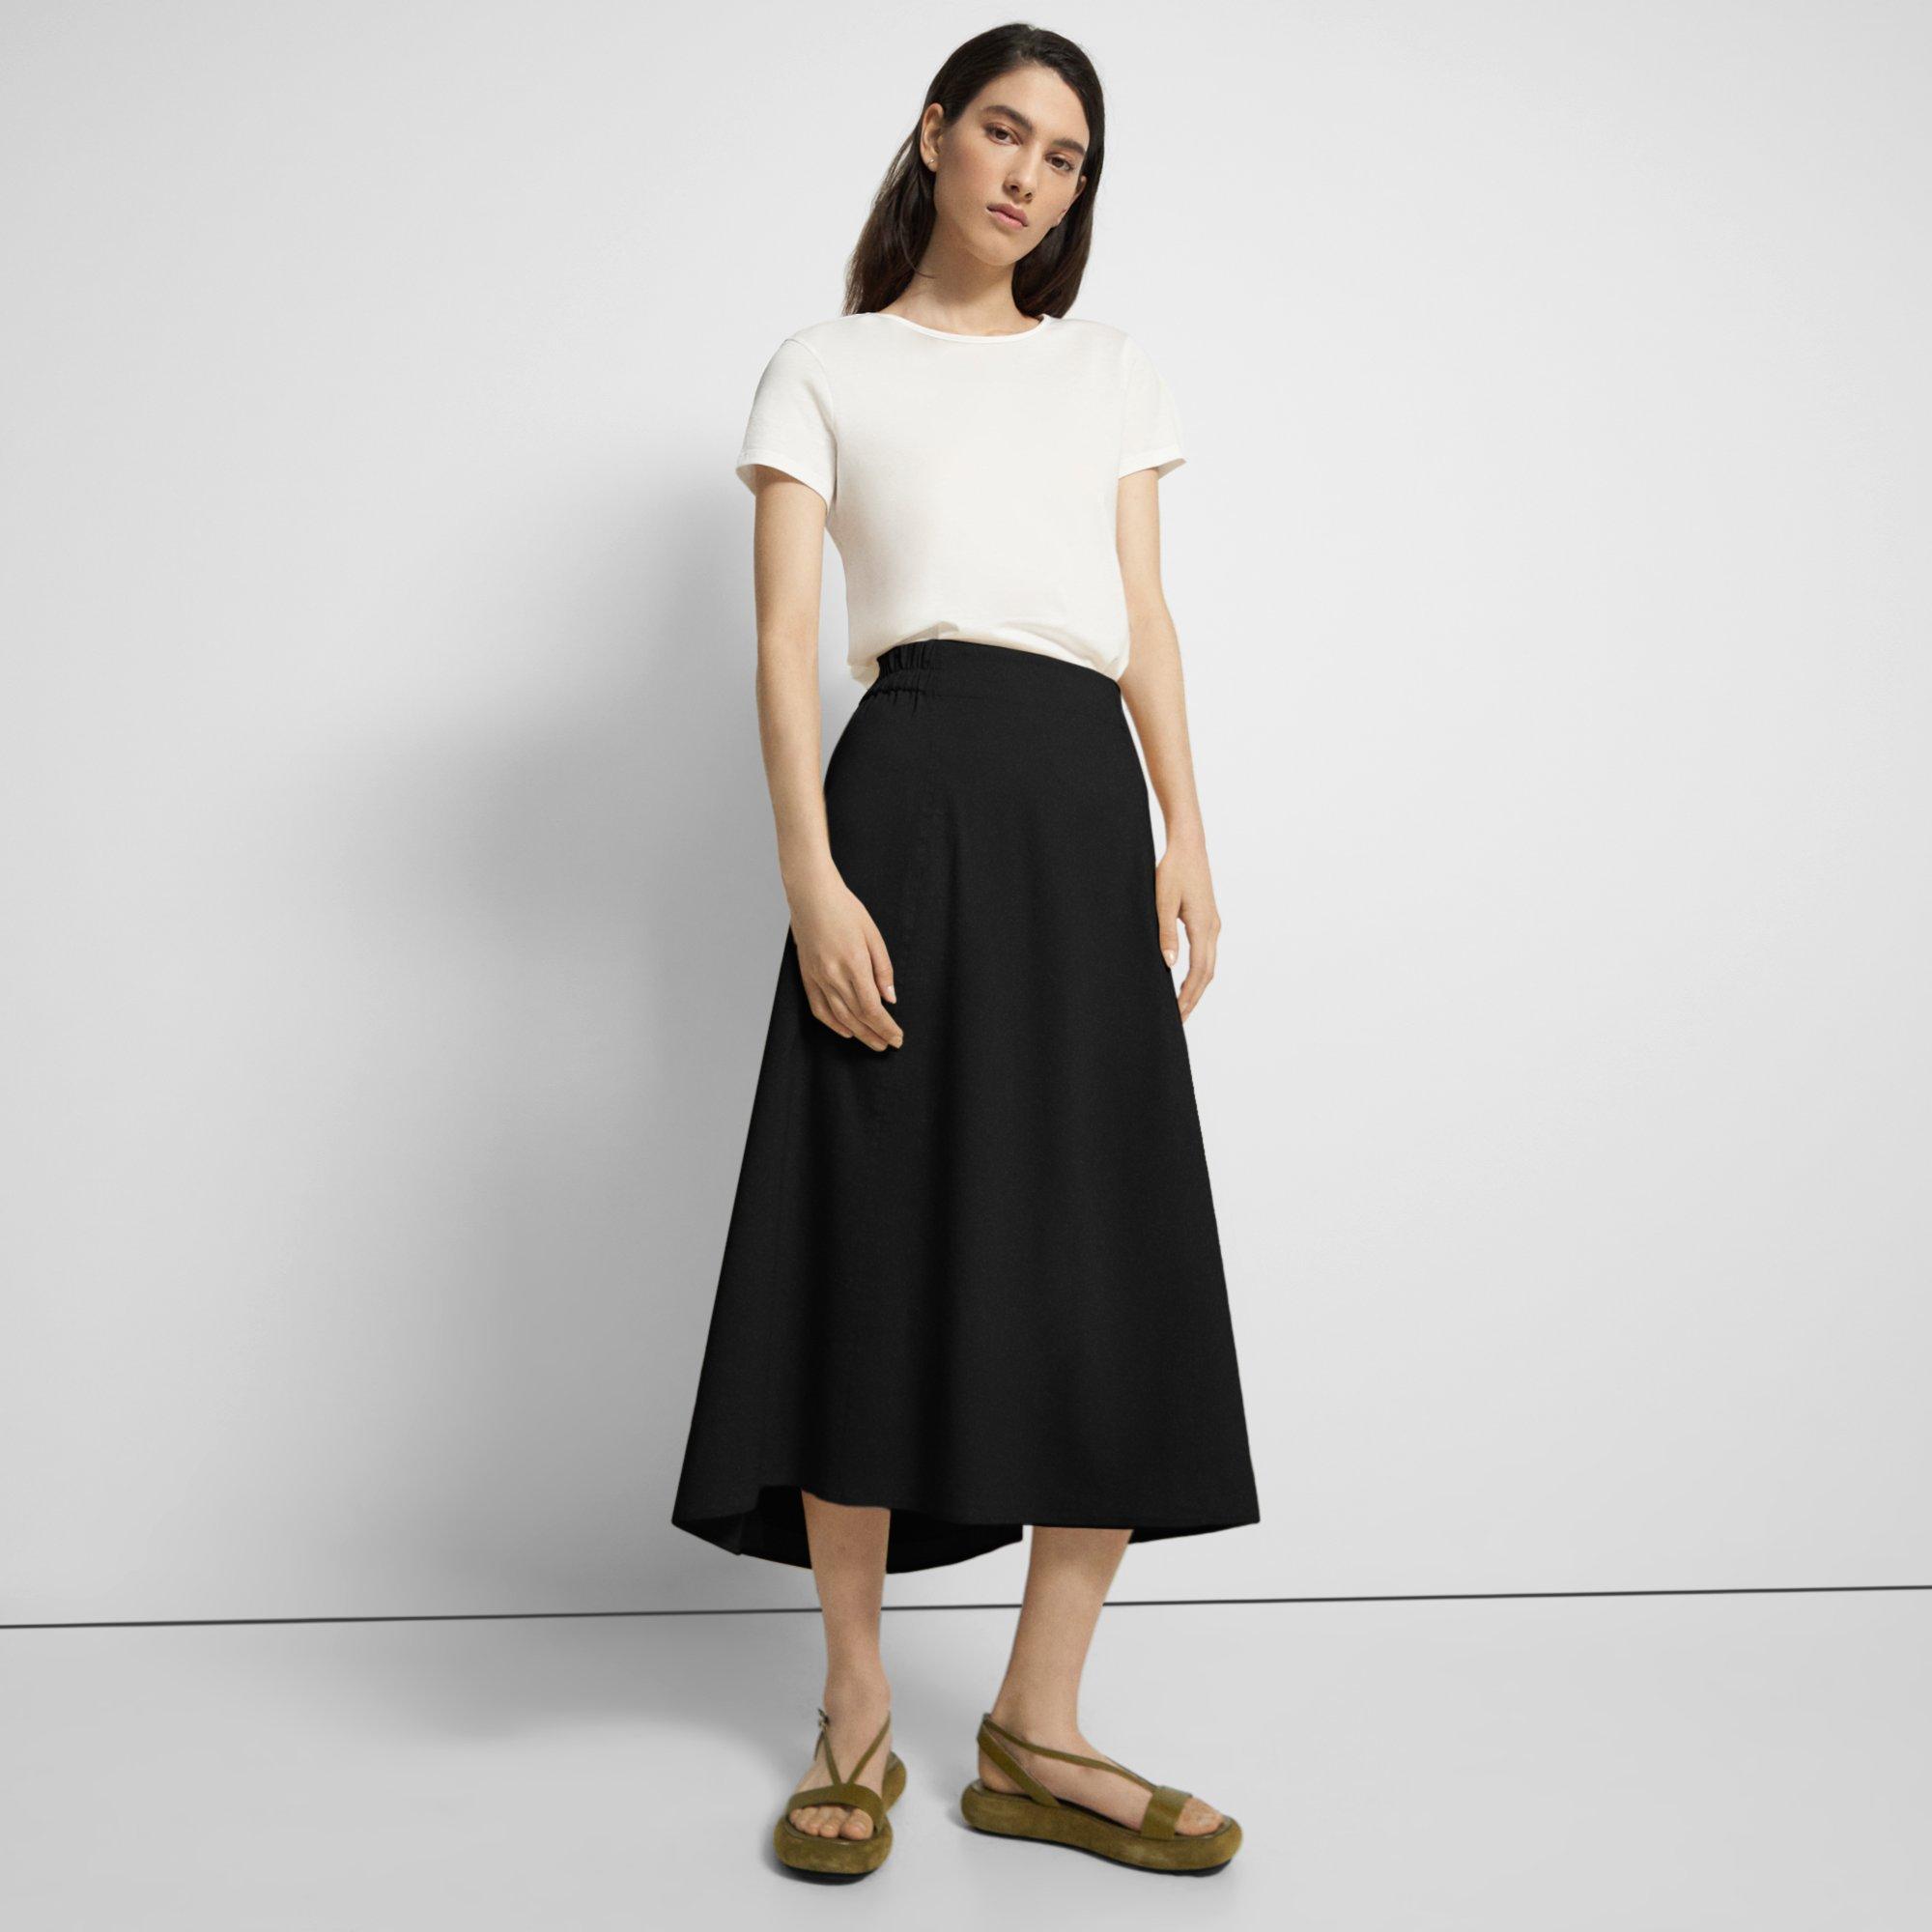 Women's Skirts | Theory UK Official Site